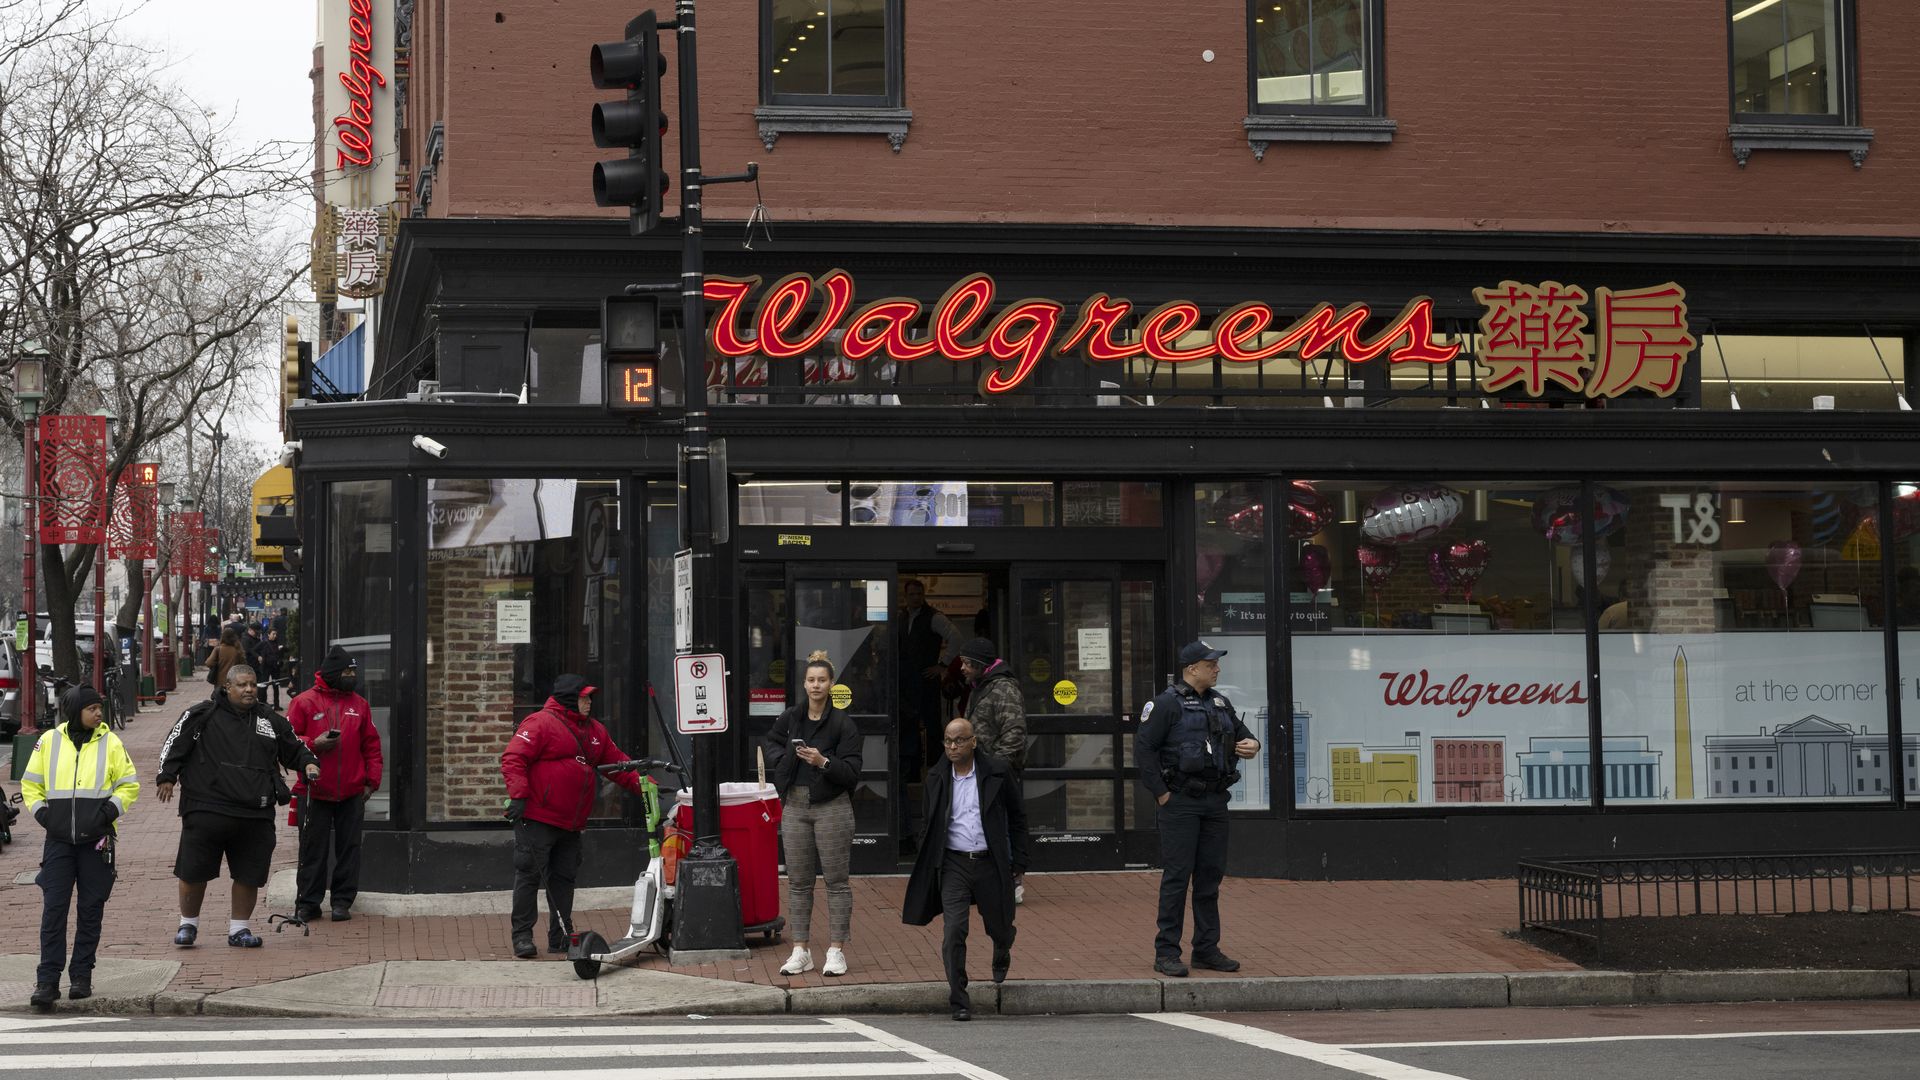 People stand on a street corner outside a building with a Walgreens sign.